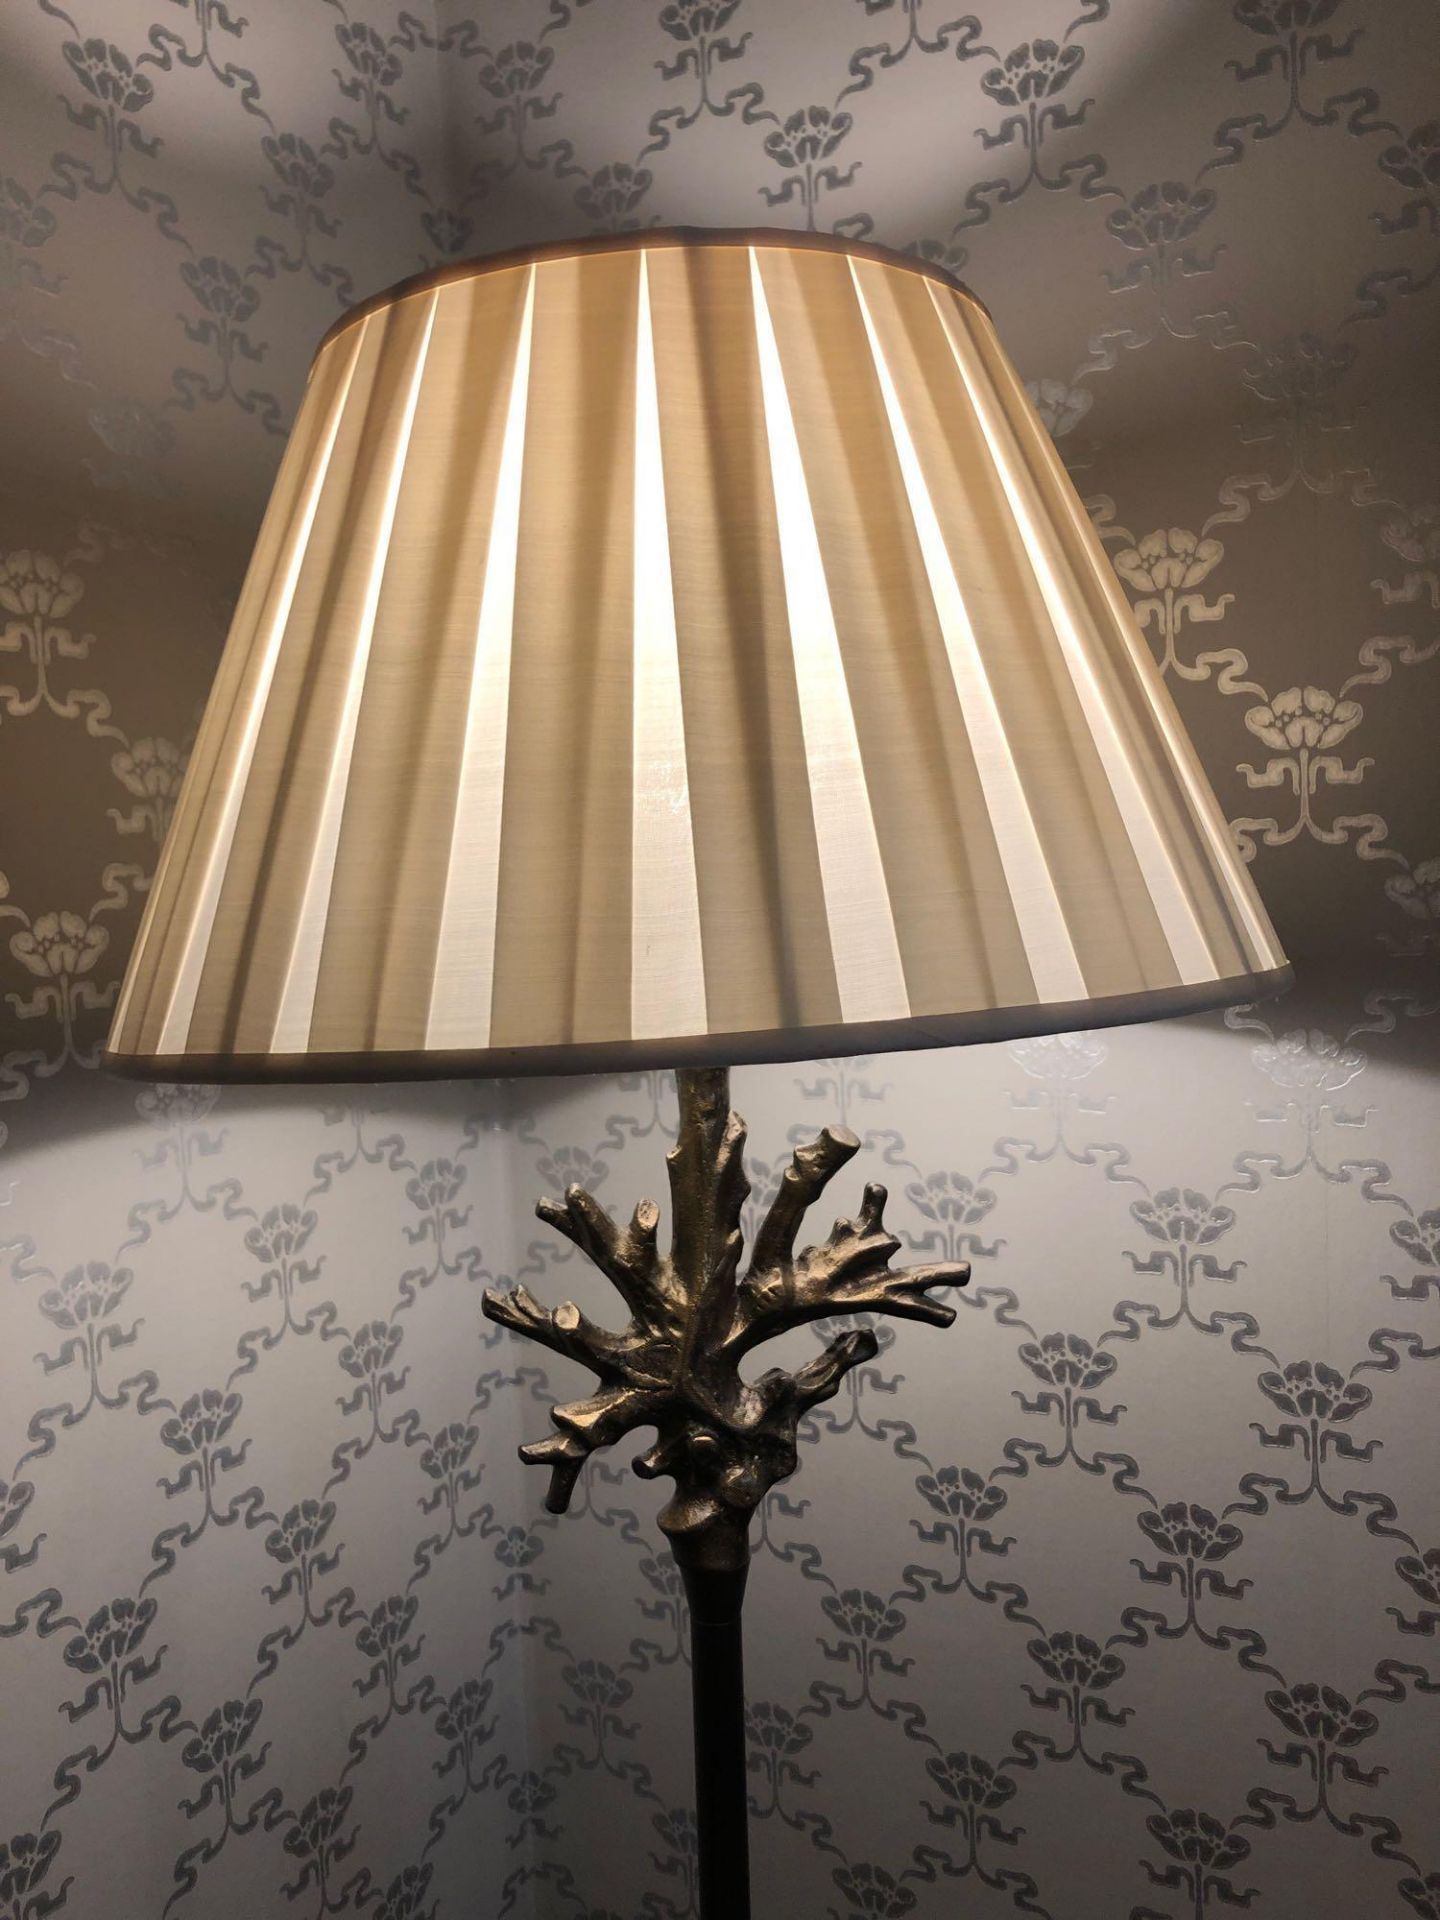 Heathfield And Co Coral Standard Lamp With Linen Shade 180cms (Room 815) - Image 2 of 3